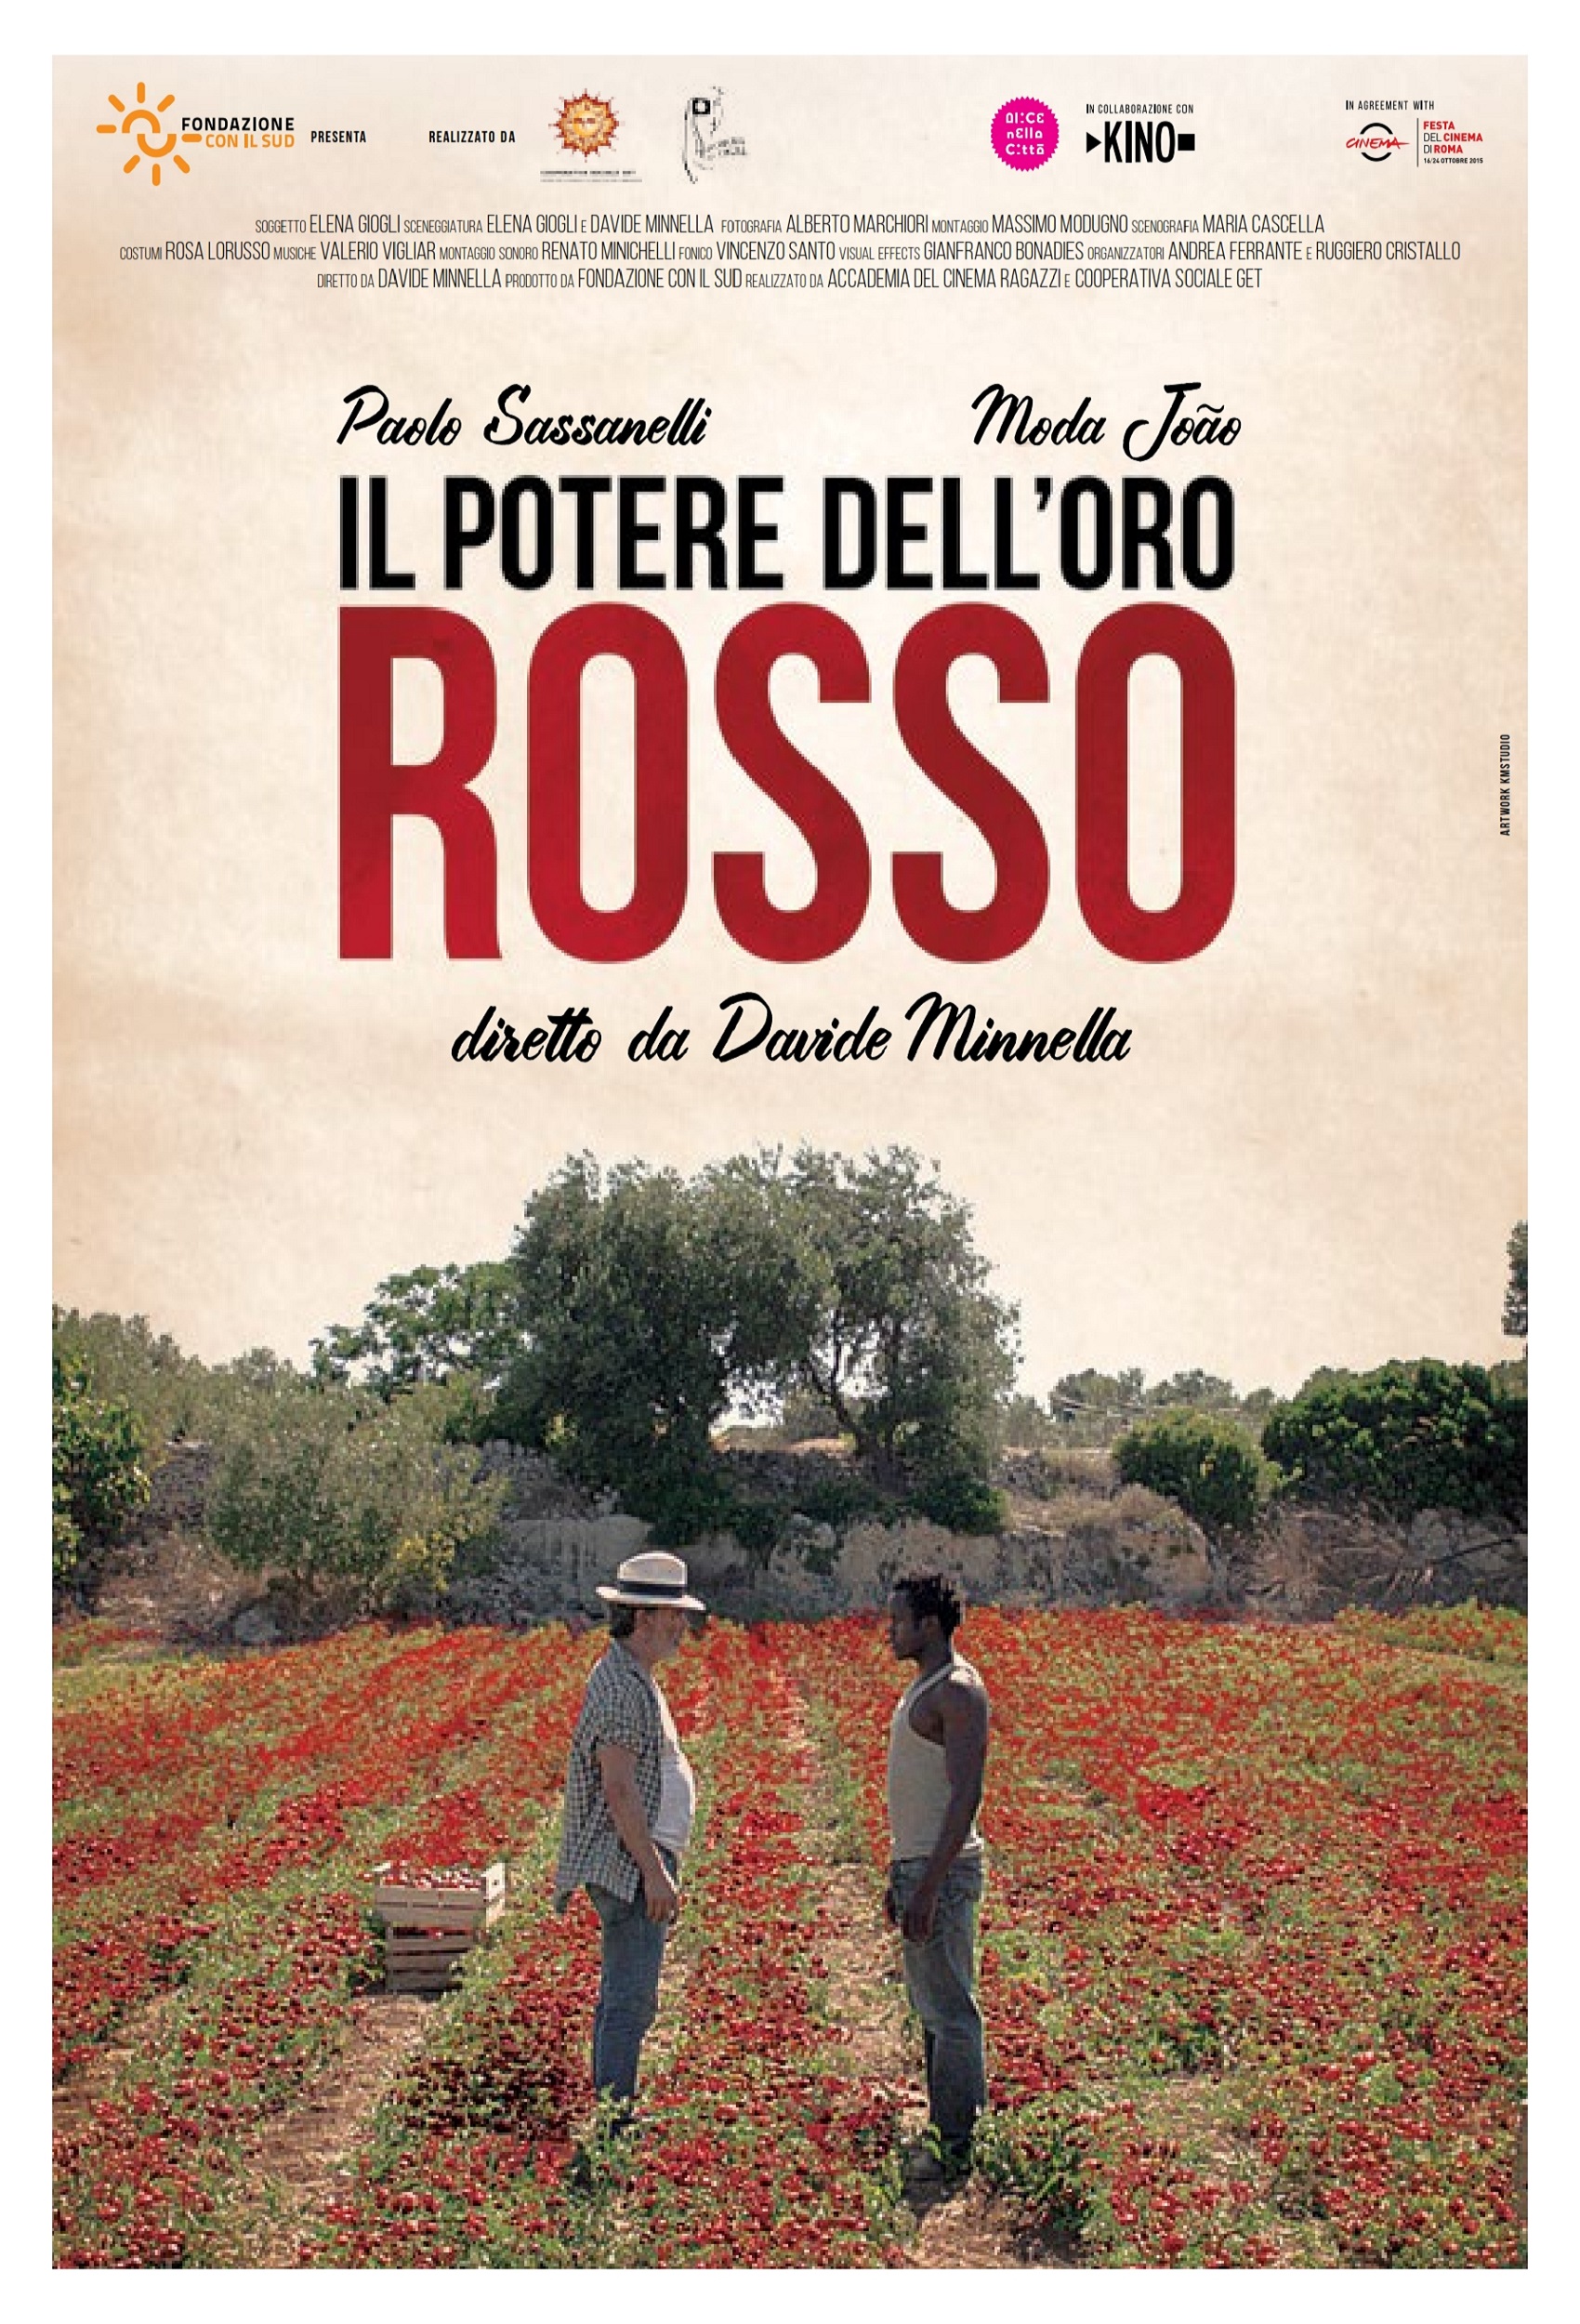 You are currently viewing Il potere dell’oro rosso